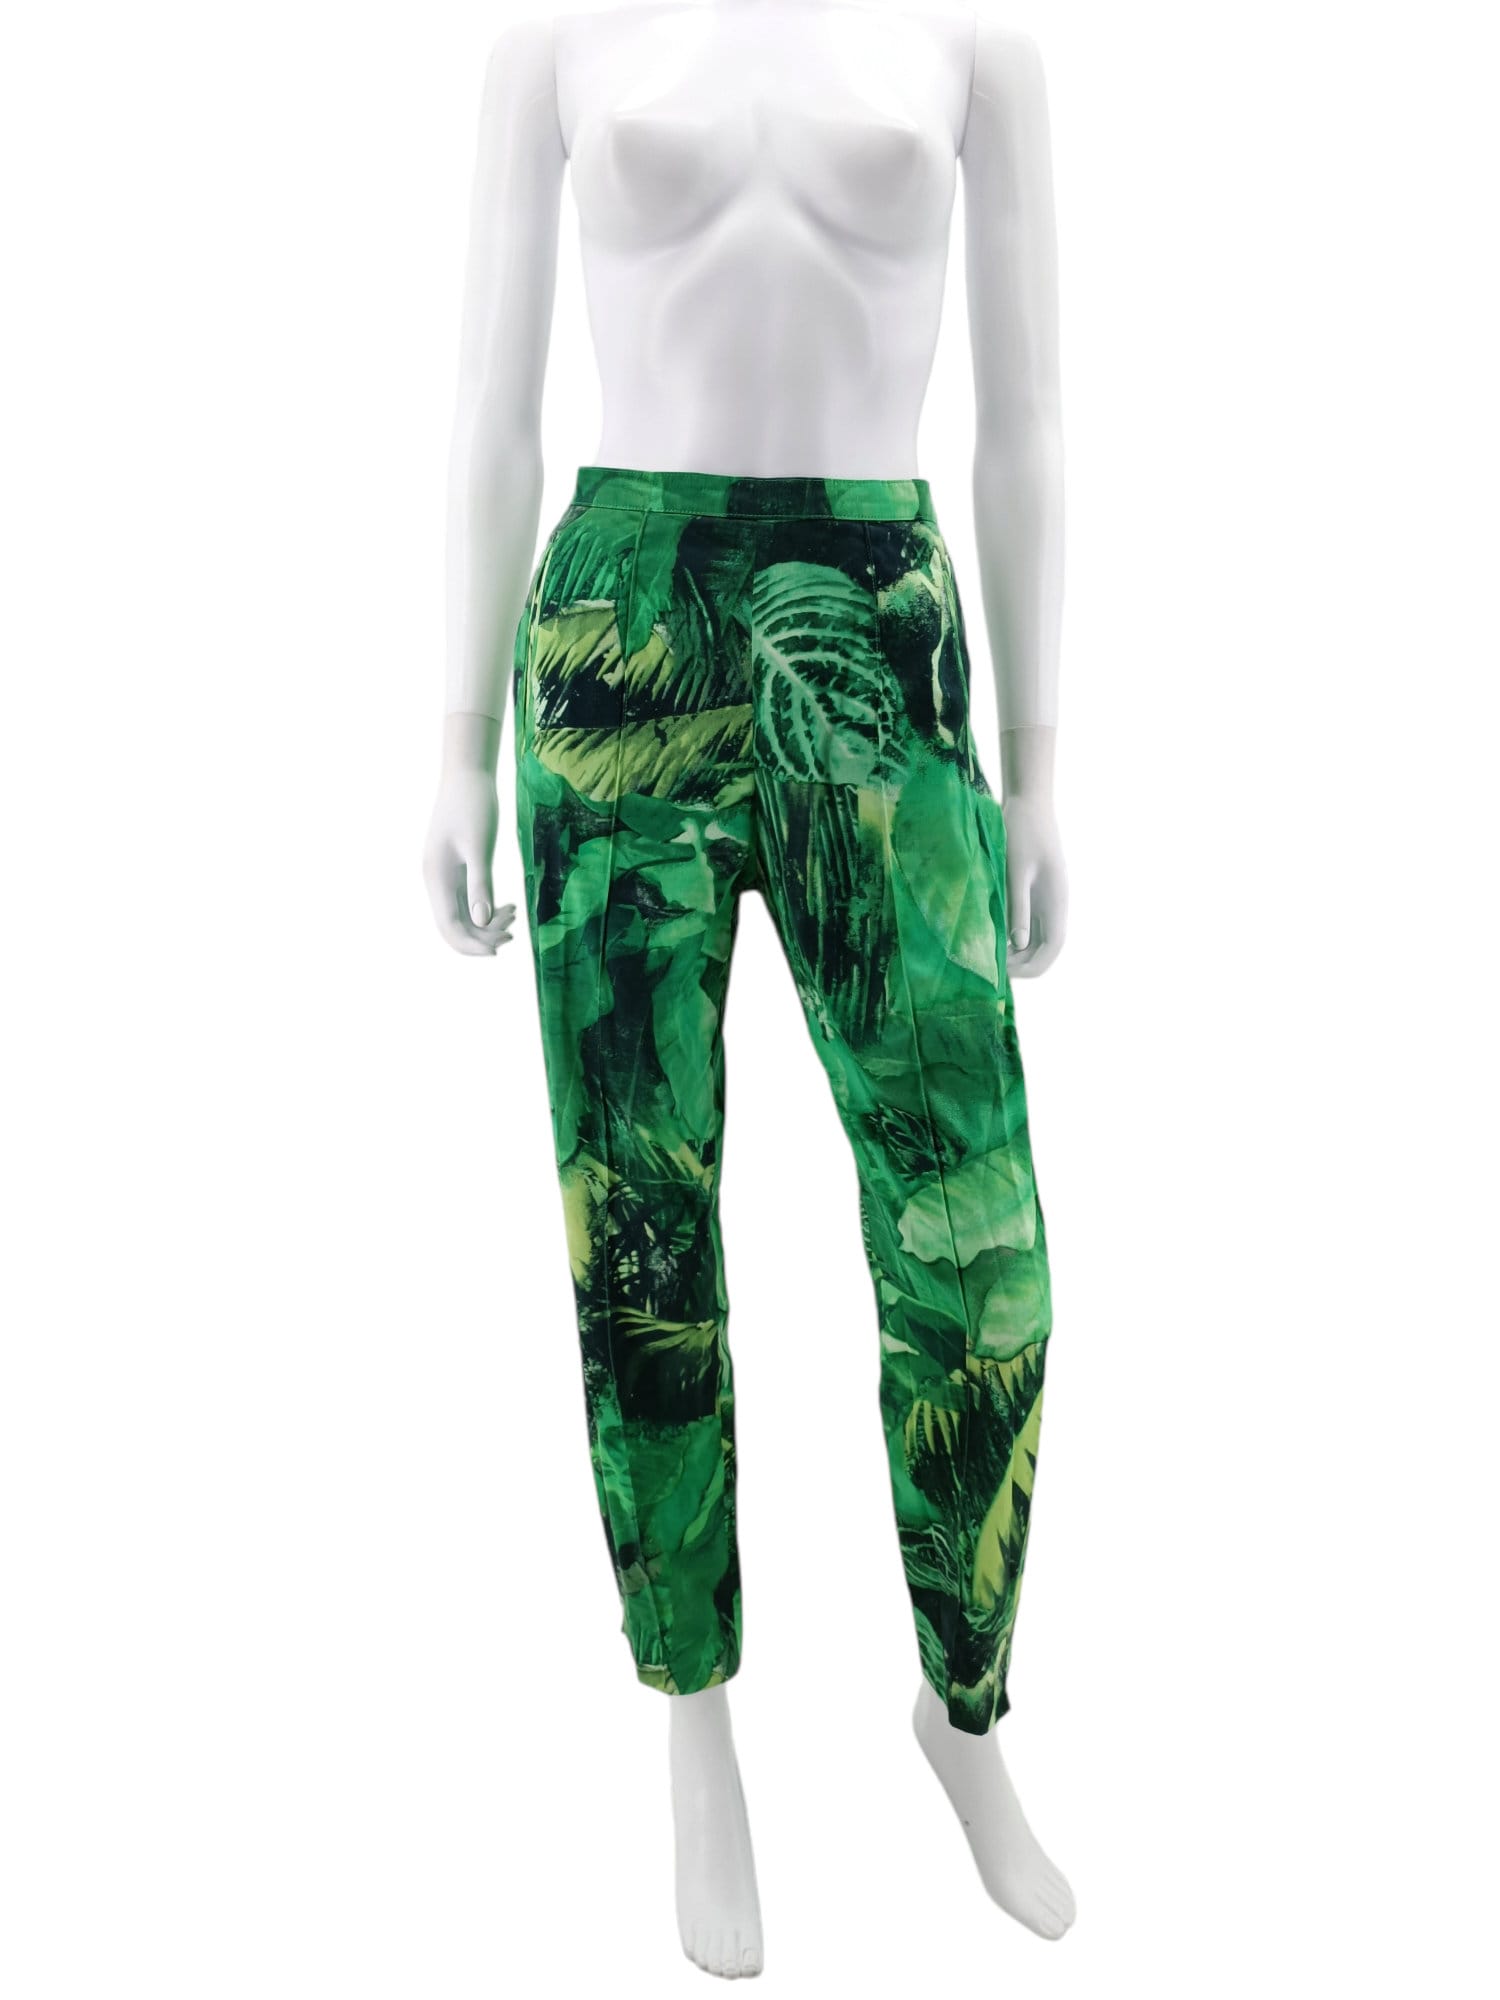 Kylo Rey Forest Dyad Sweatpants, Girl I've Heard so Much About